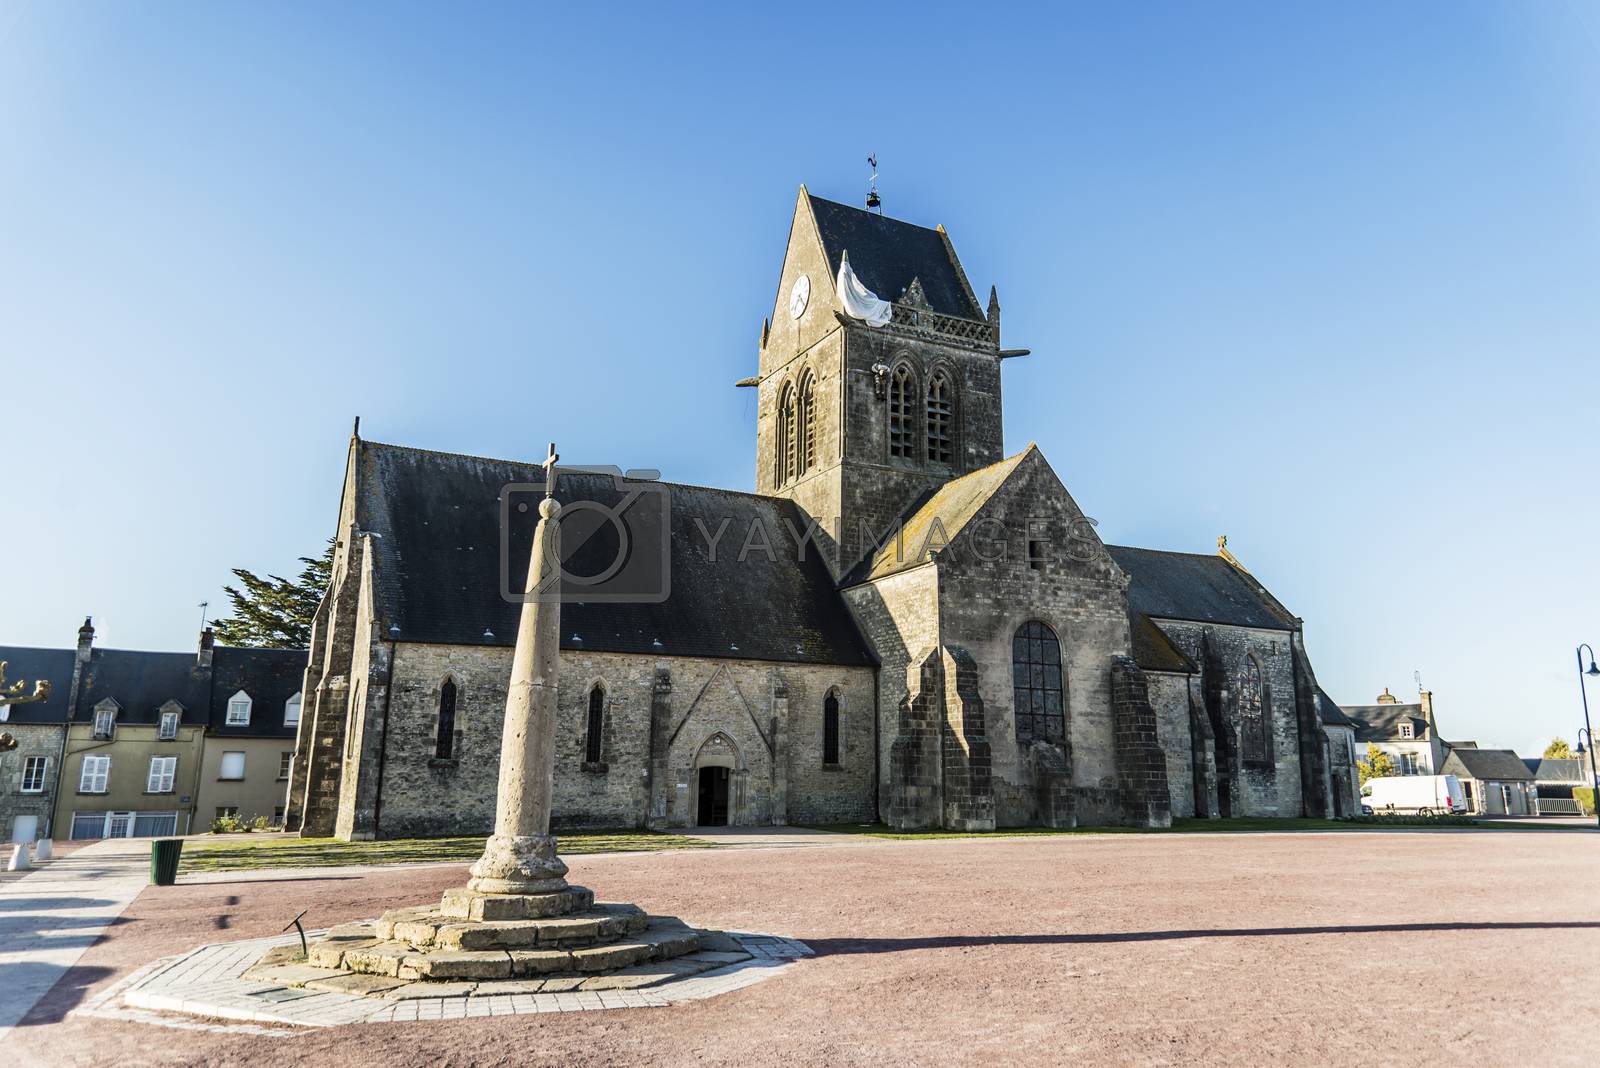 Royalty free image of St Mere Eglise by edella